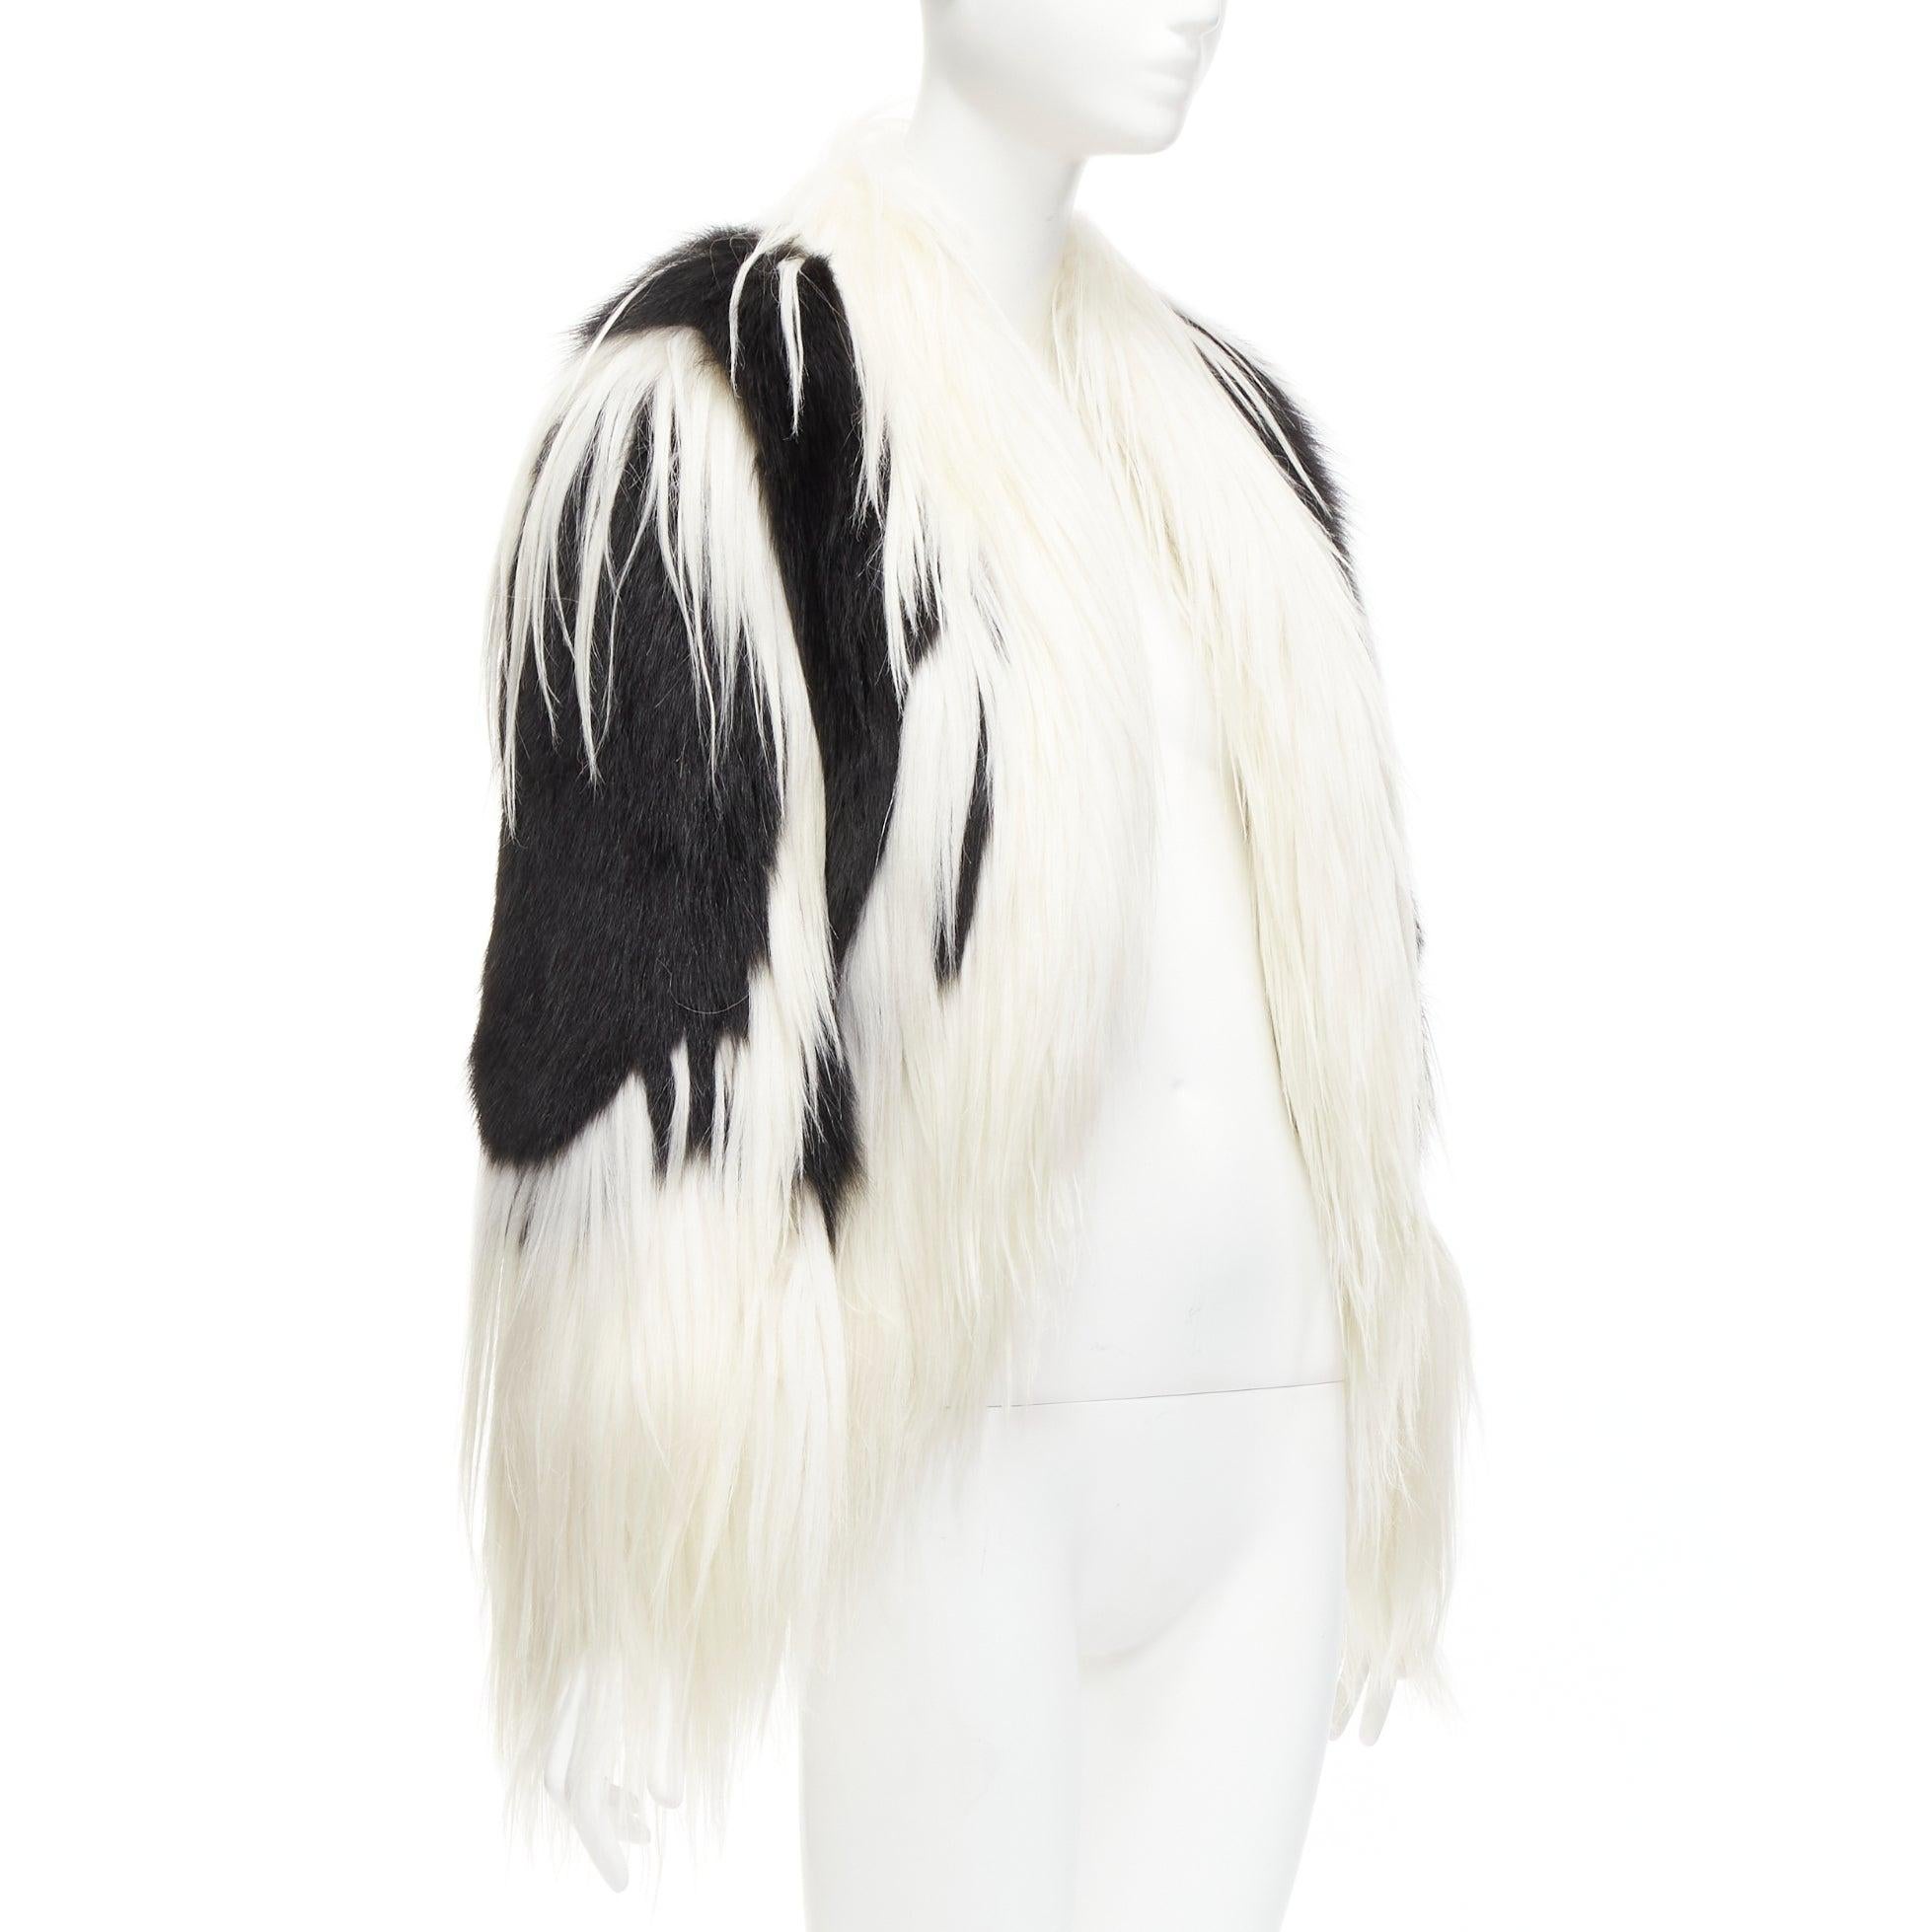 REVILLON black white rare goat rex rabbit fur patchwork long sleeve coat FR36 S
Reference: NKLL/A00139
Brand: Revillon
Material: Fur
Color: Black, White
Pattern: Animal Print
Lining: Multicolour Fabric

CONDITION:
Condition: Excellent, this item was